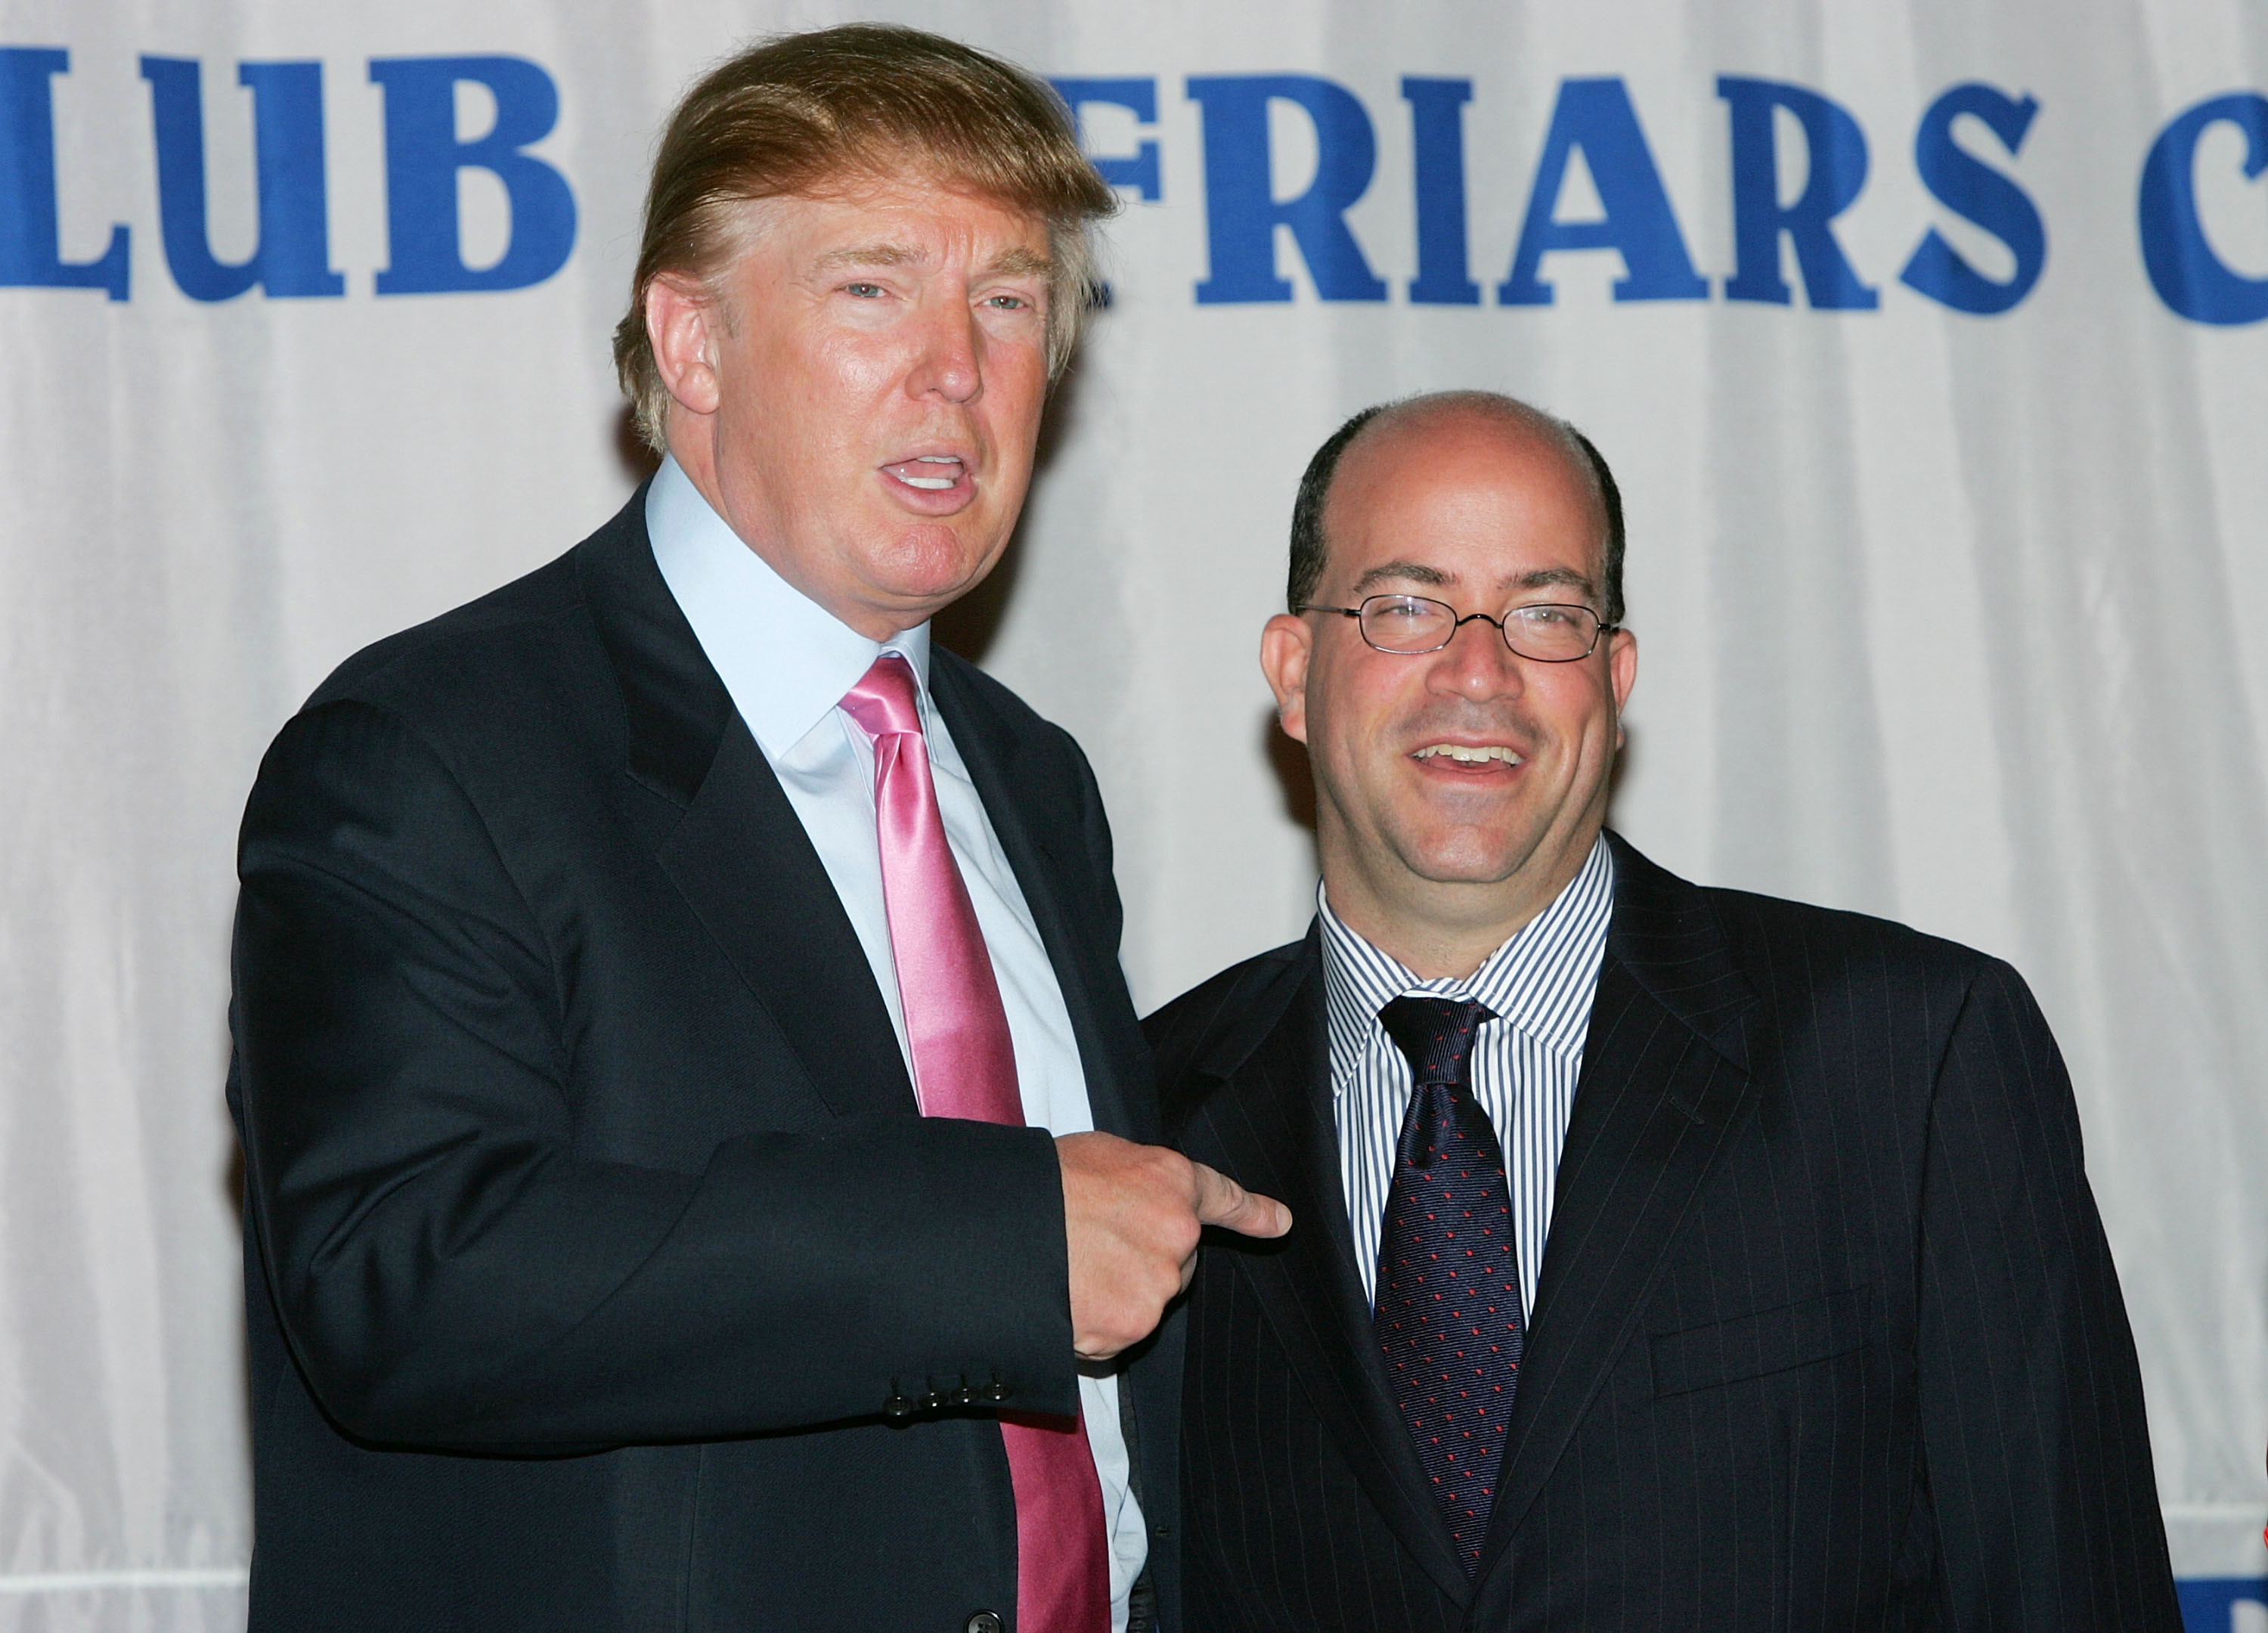 NEW YORK - OCTOBER 15: (L-R) Real Estate mogul and TV personality Donald Trump and NBC Entertainment President Jeff Zucker attend the Donald Trump Friars Club Roast Luncheon at the New York Hilton October 15, 2004 in New York City. (Photo by Evan Agostini/Getty Images)